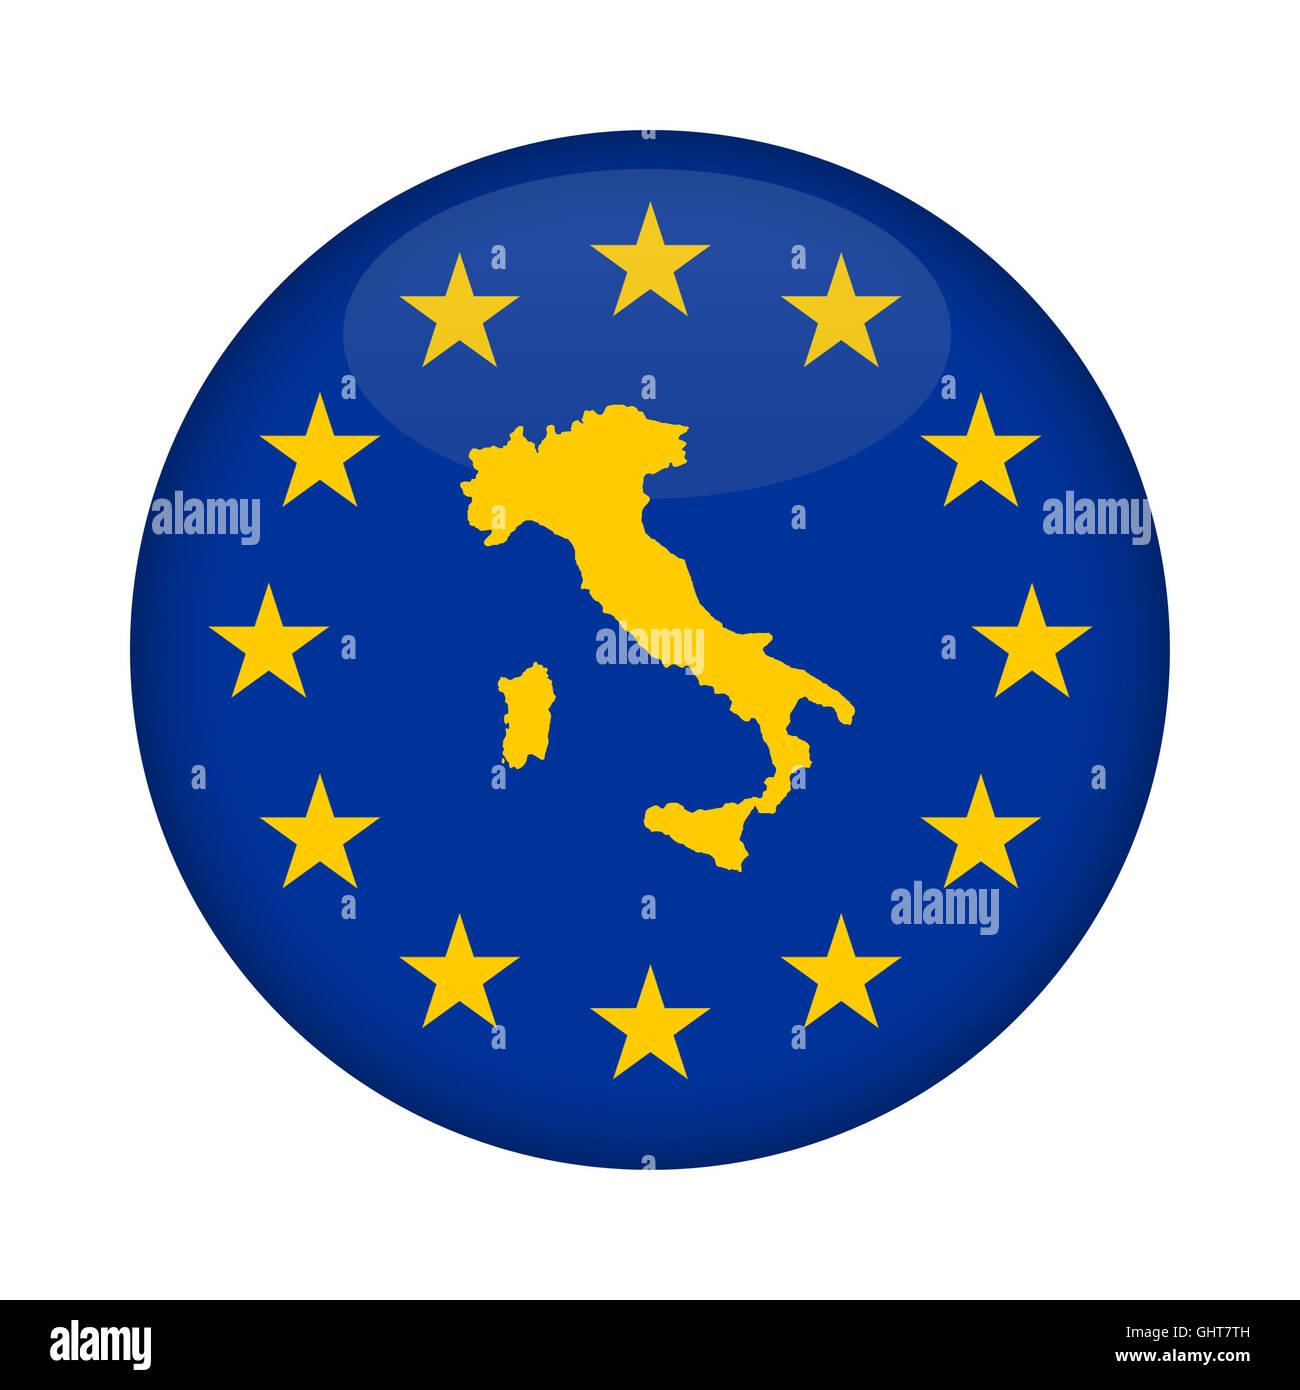 Italy map on a European Union flag button isolated on a white background. Stock Photo